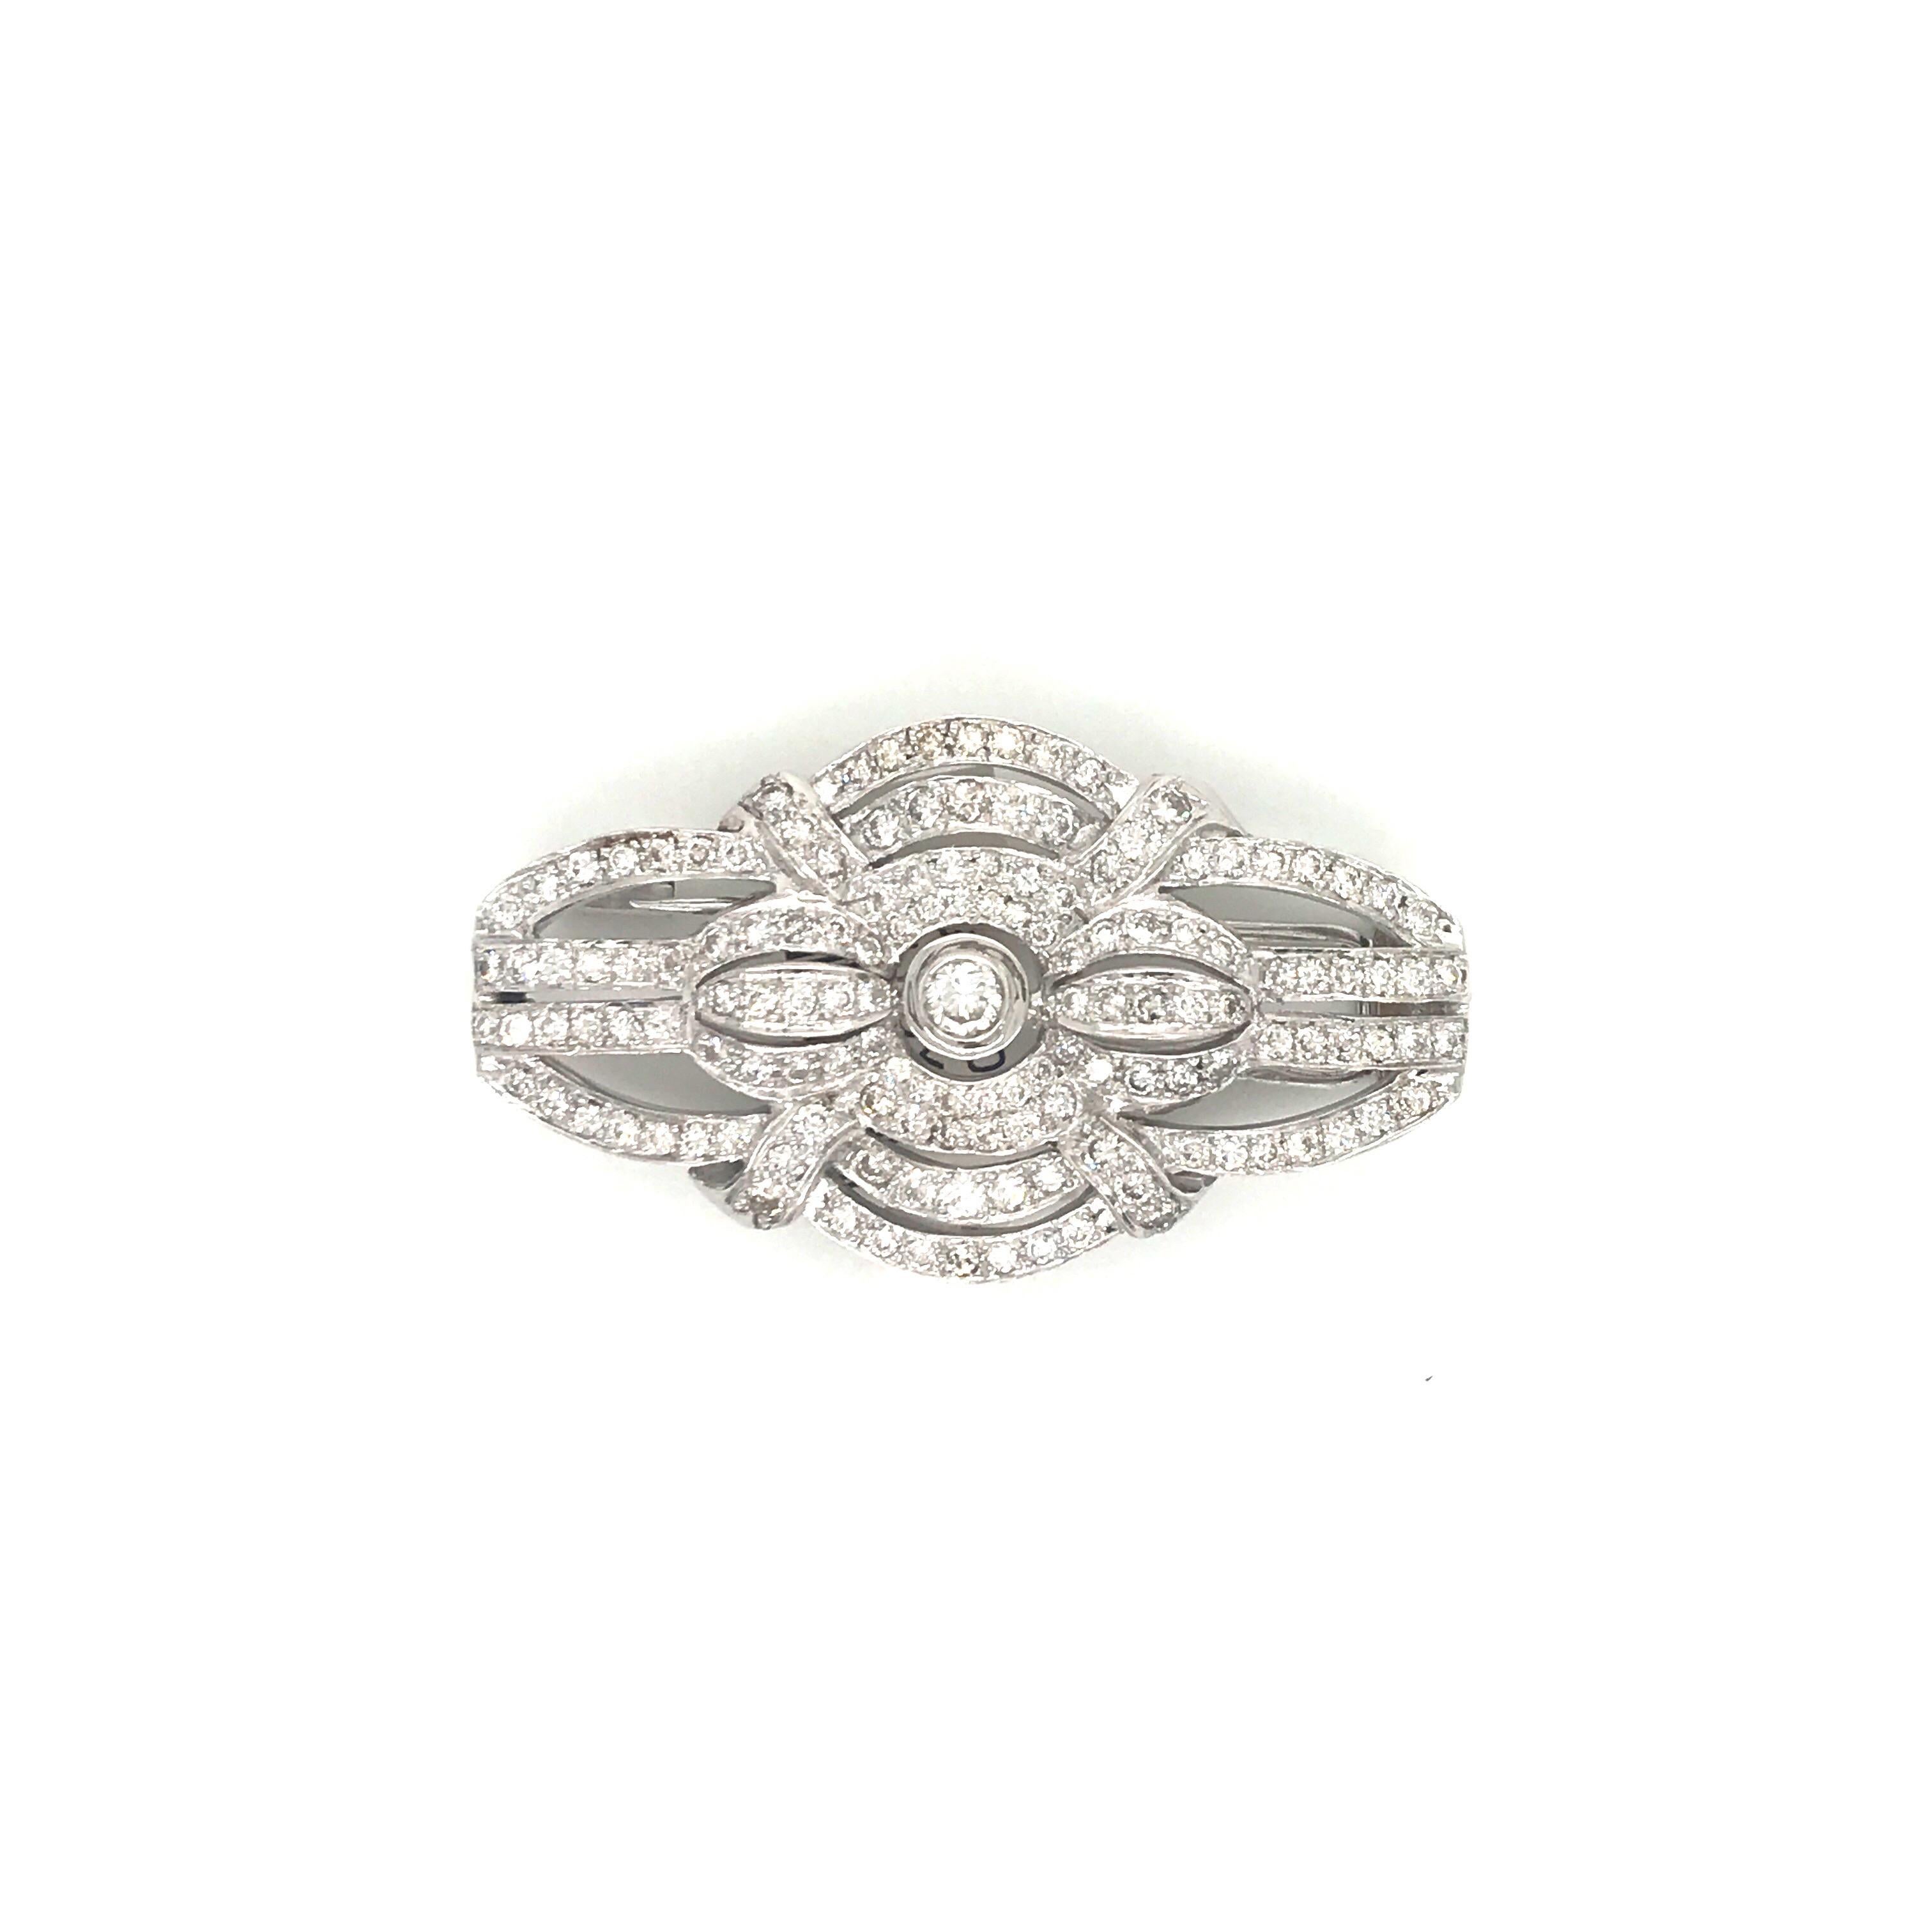 Stamped Italy 18K, this Art Deco inspired brooch features numerous round brilliants weighing 2.50 carats.
Color H
Clarity SI